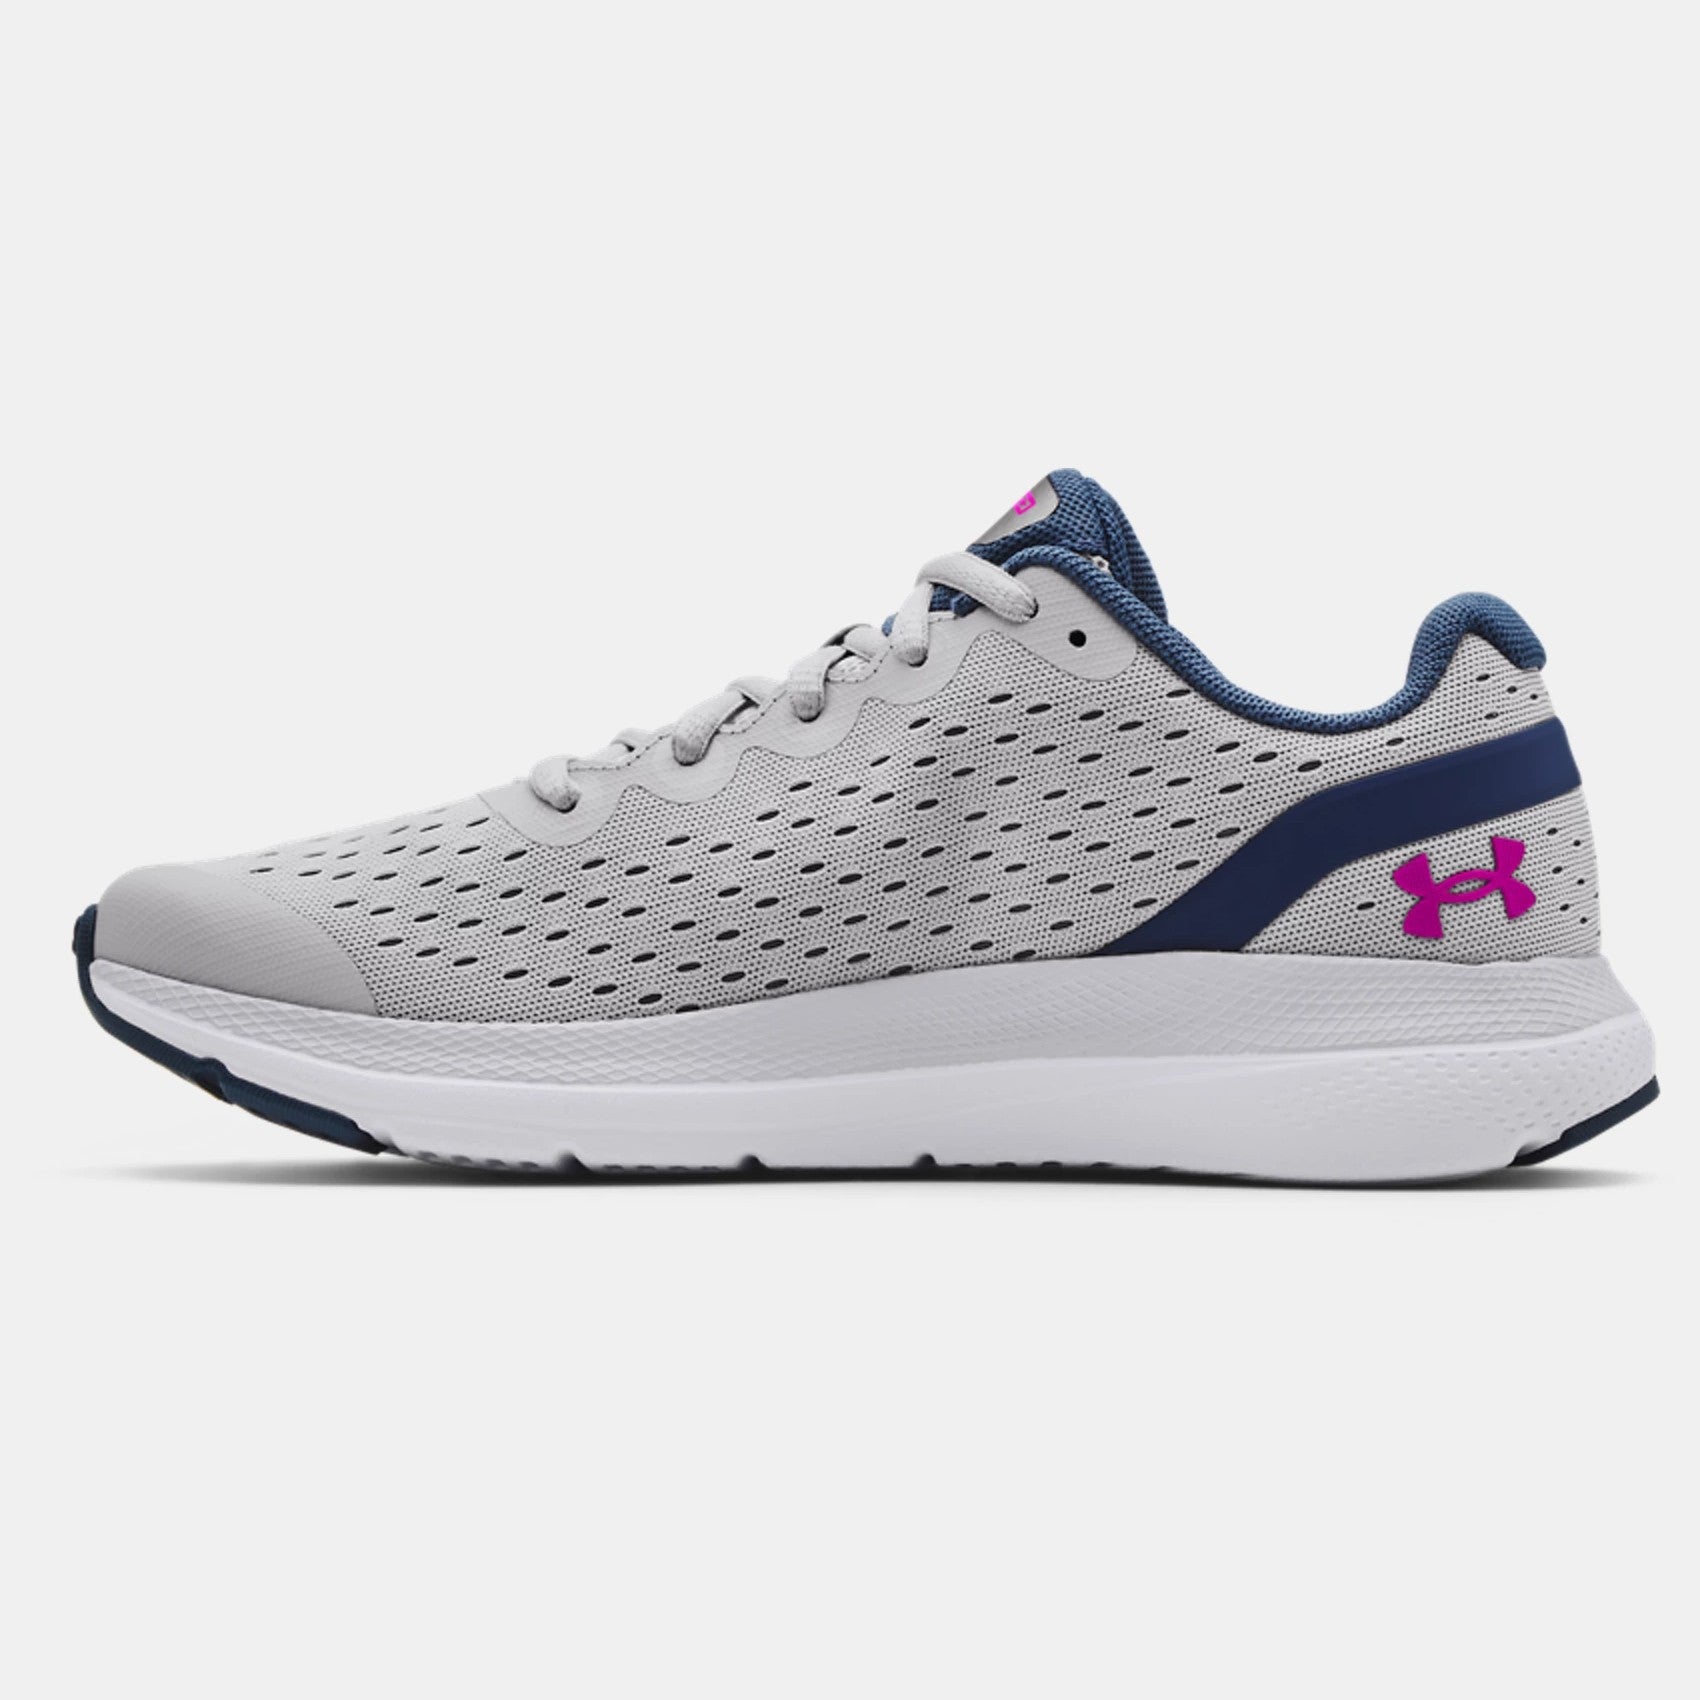 Under Armour Women's Charged Impulse 2, Halo Gray